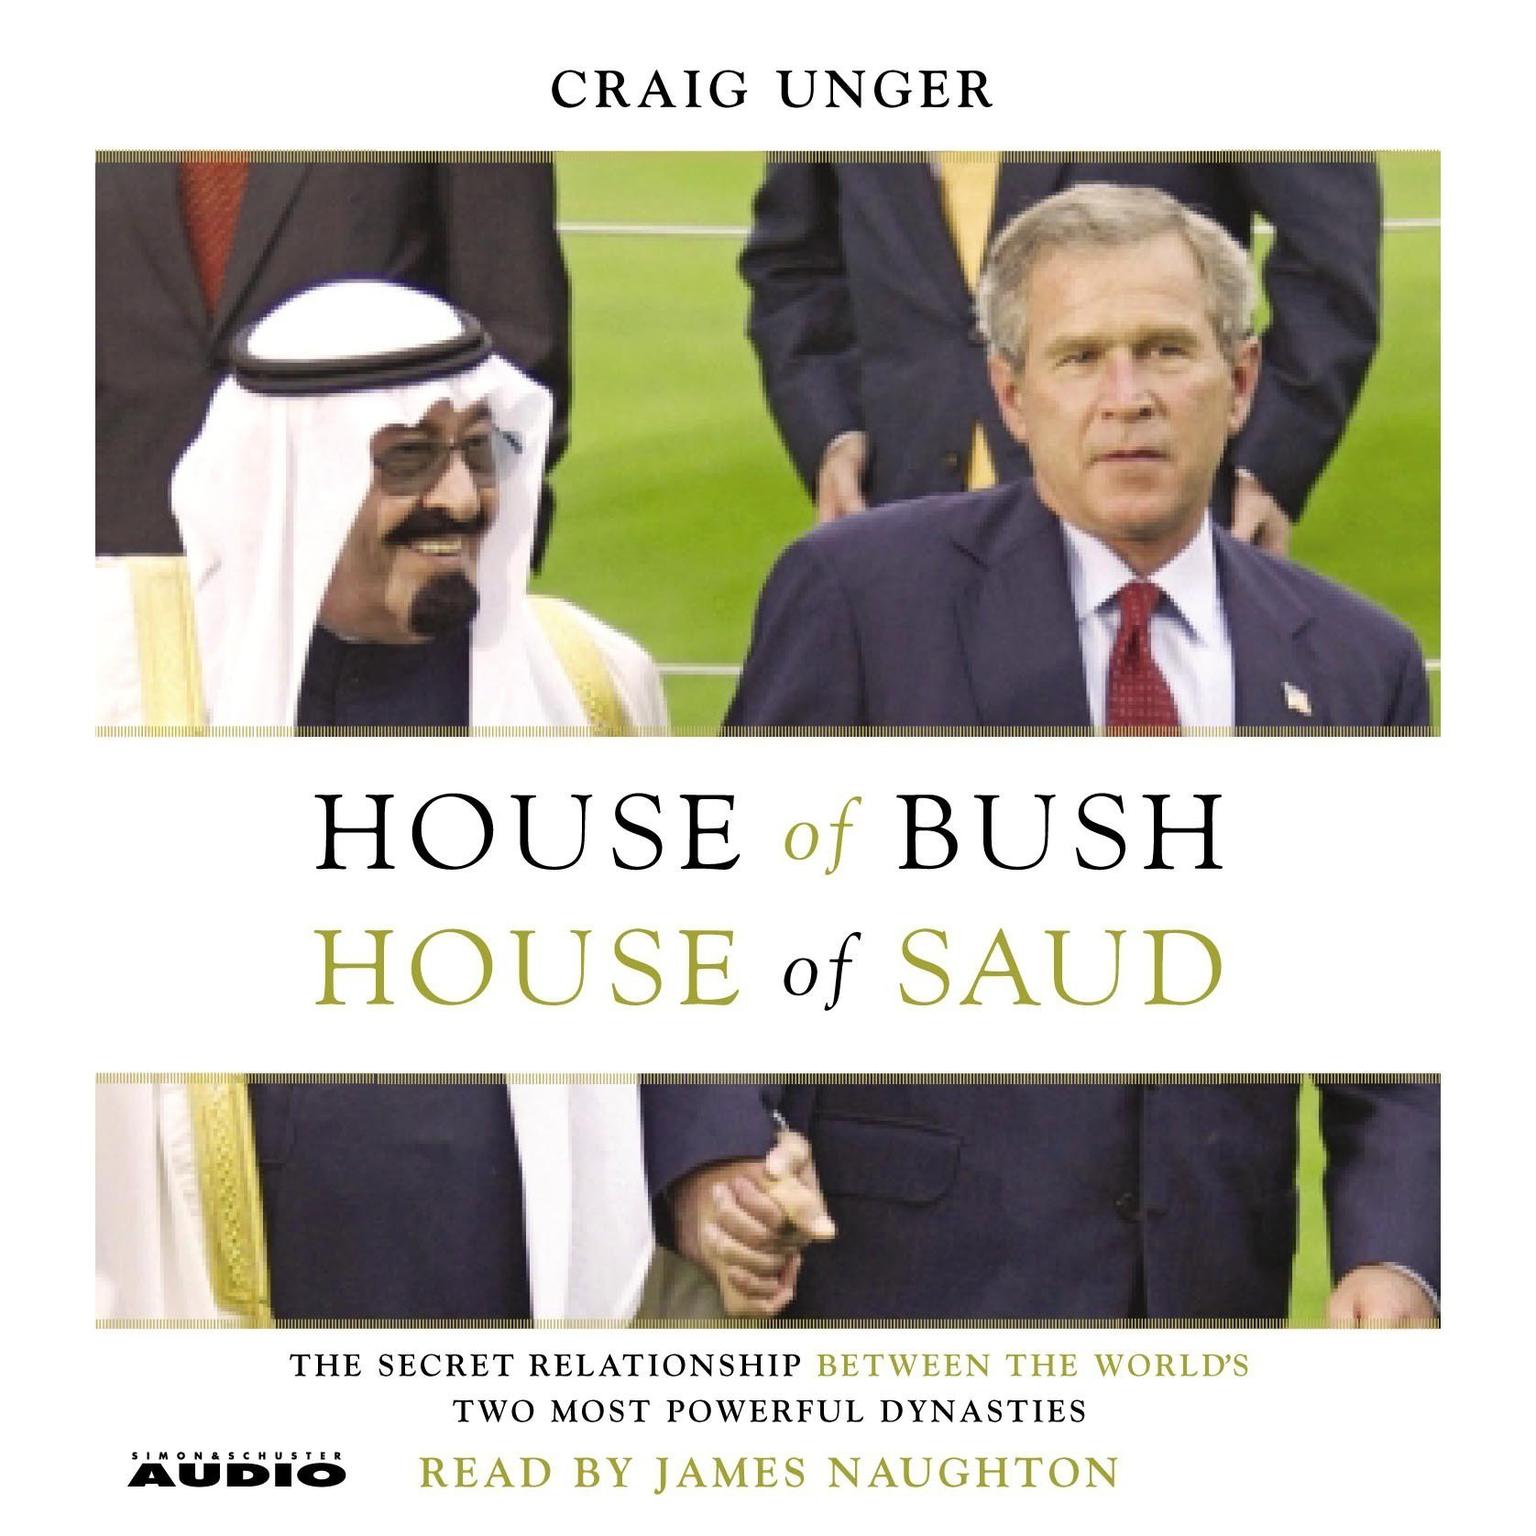 House of Bush, House of Saud (Abridged): The Secret Relationship Between the Worlds Two Most Powerful Dynasties Audiobook, by Craig Unger